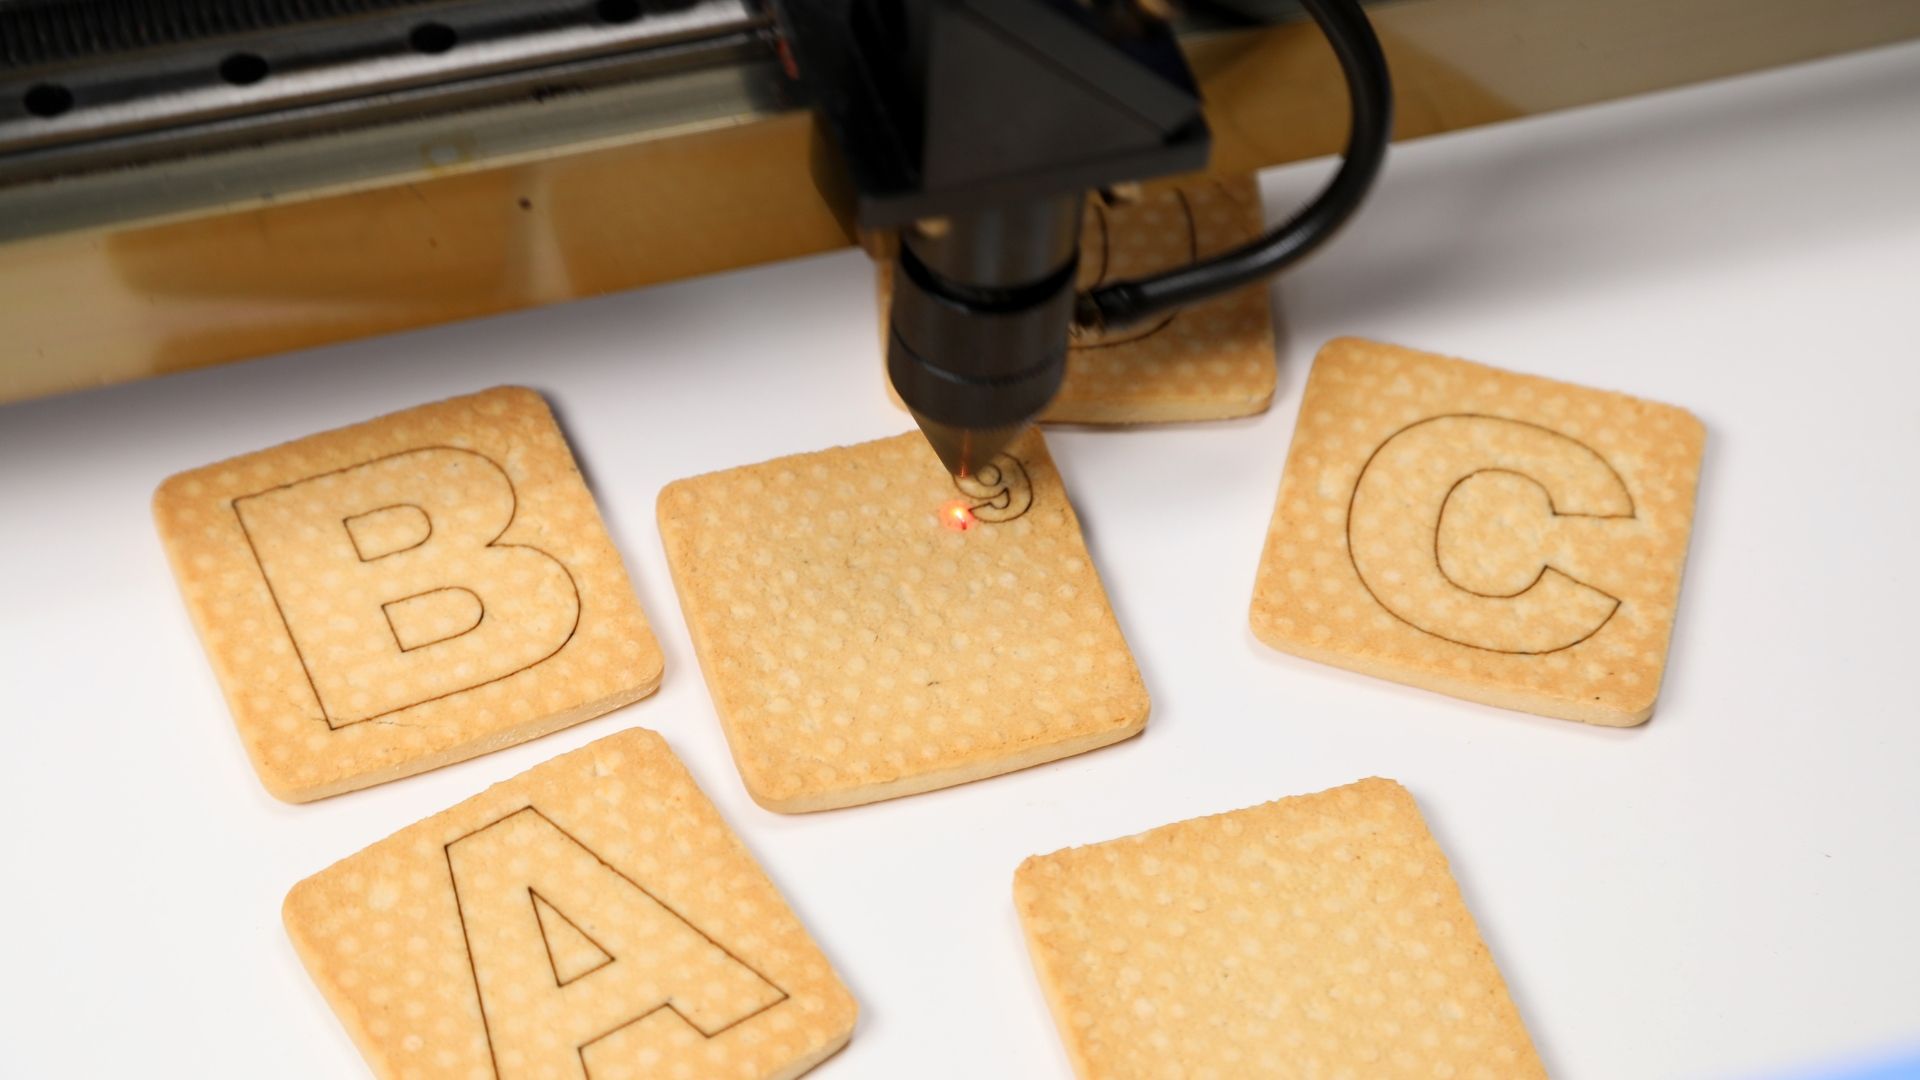 A machine is cutting out letters on some cookies